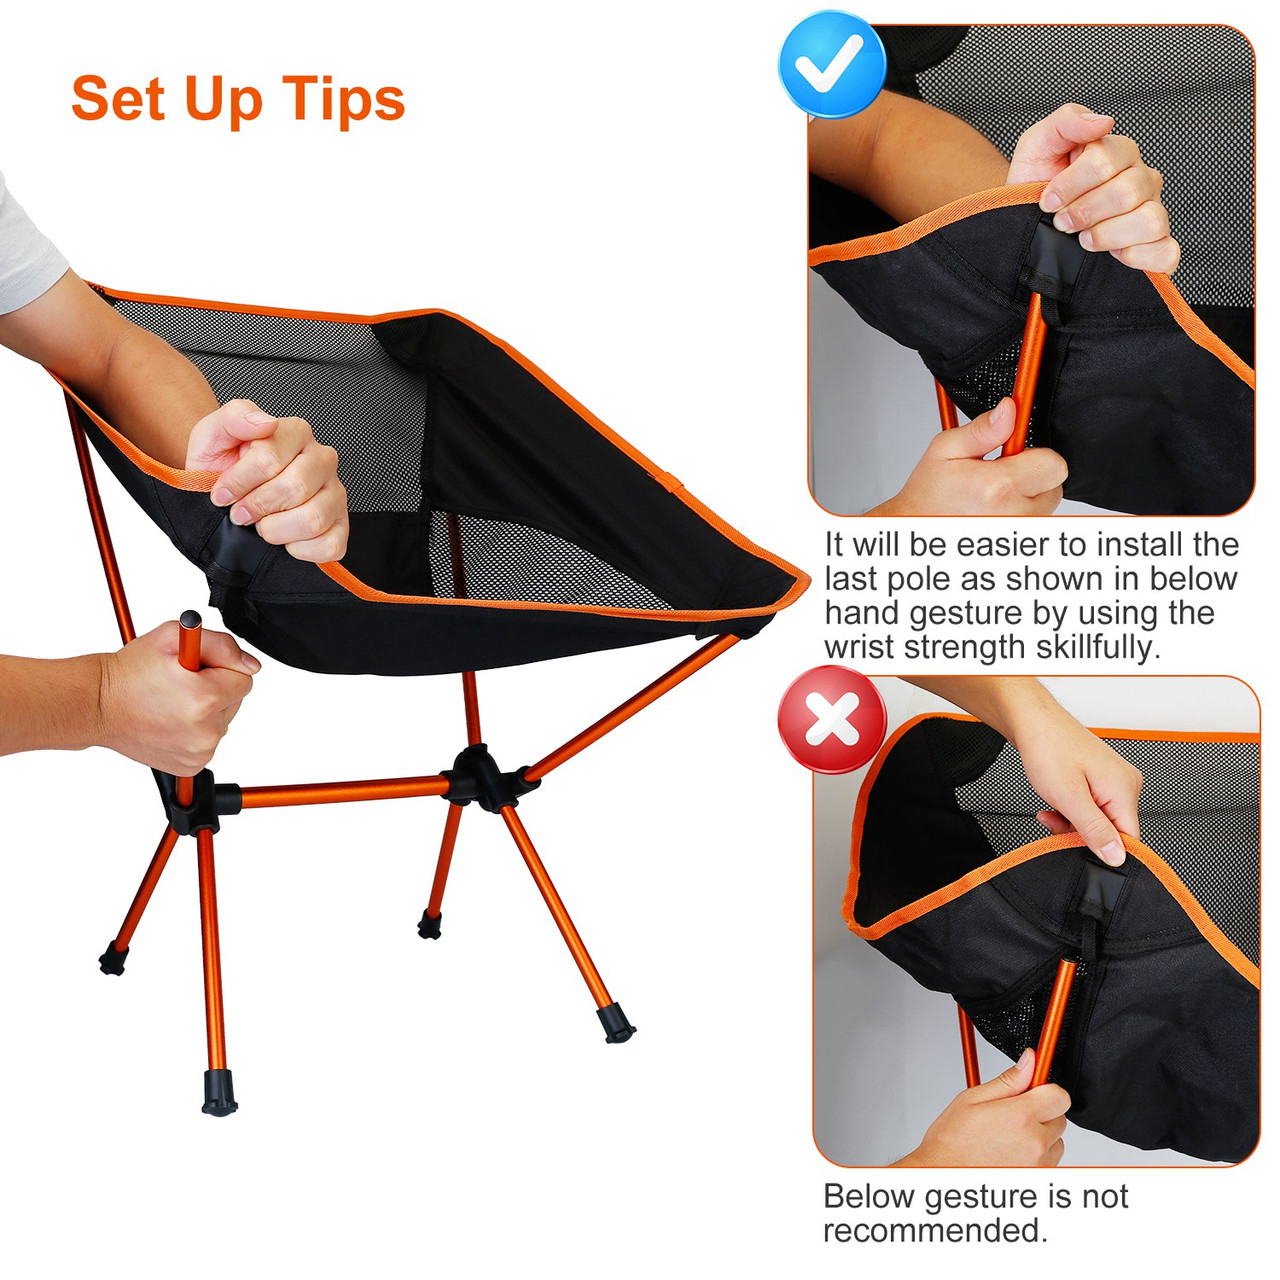 LakeForest® Foldable Camping Chair product image